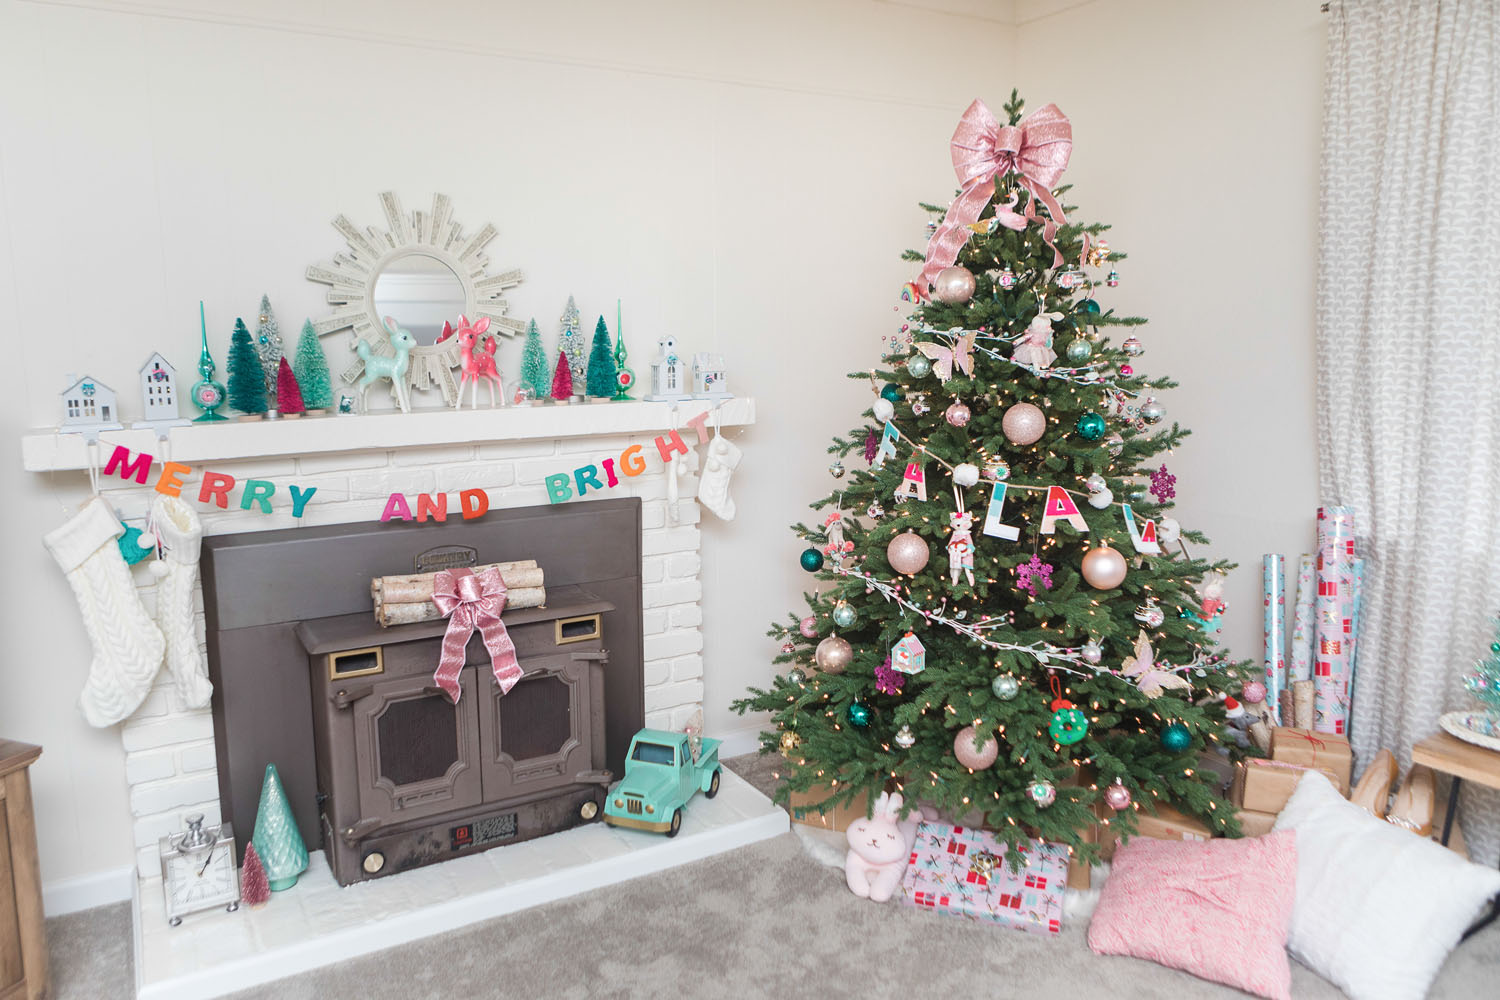 Living room with cream walls decorated for Christmas. The fireplace mantel is decorated with colorful bottle brush trees and a "Merry and Bright" garland. The tree is decorated with colorful ornaments and is topped with a giant pink bow.